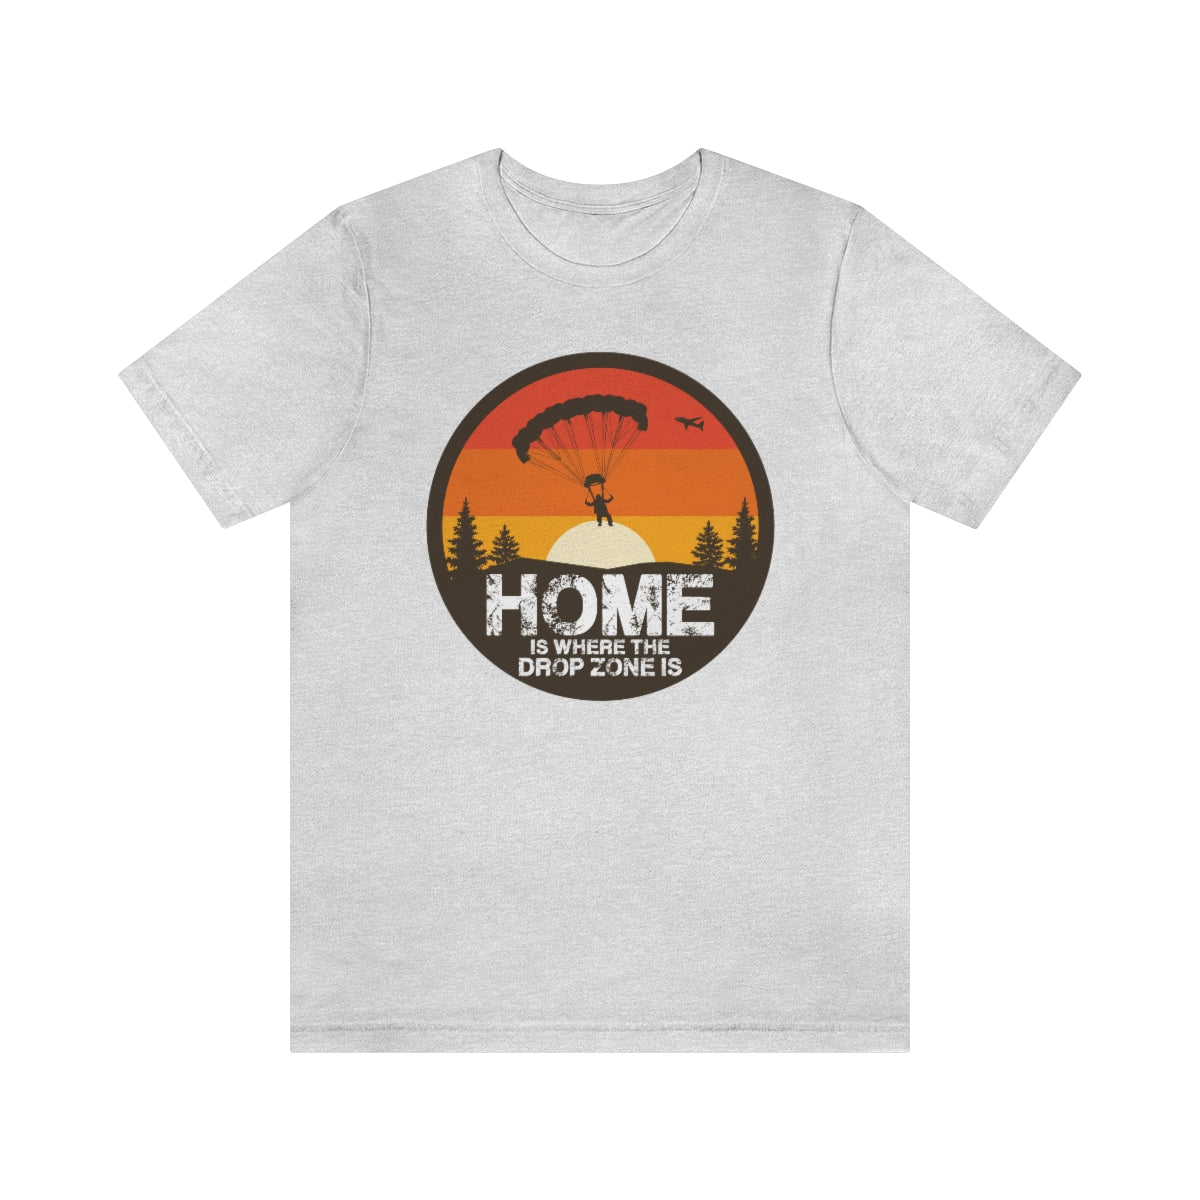 Home Is Where The DZ Is T-Shirt